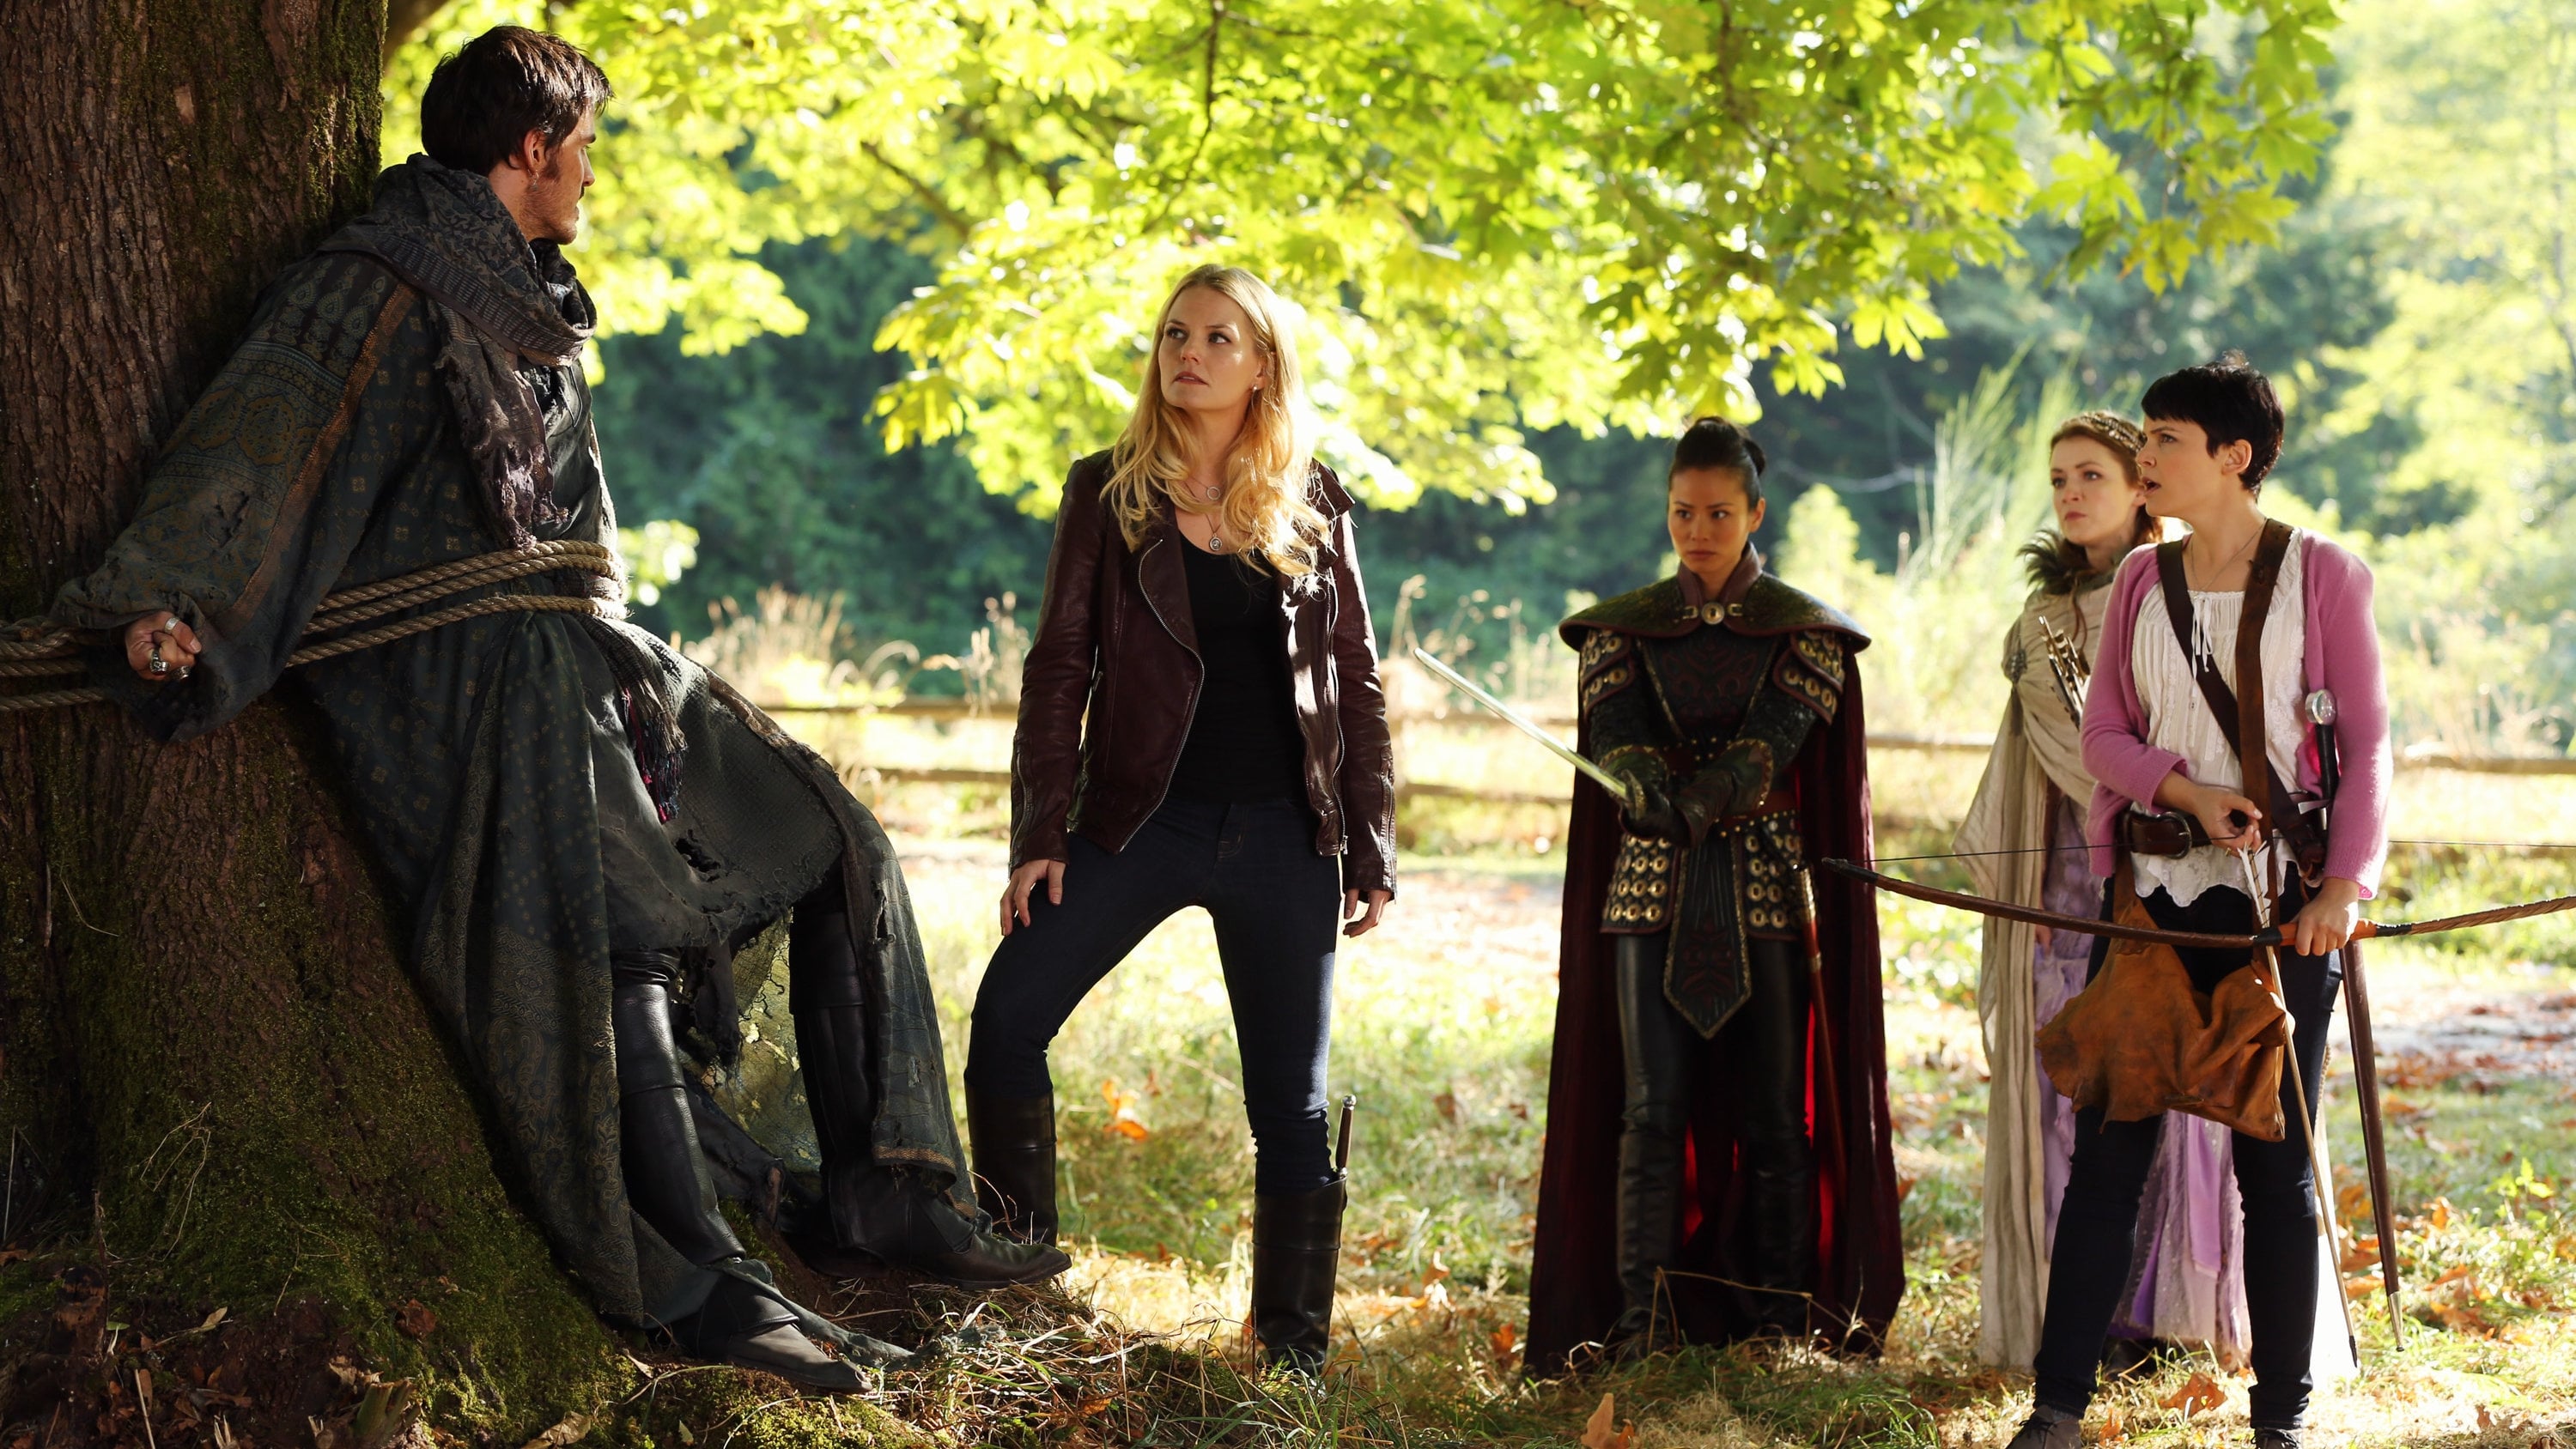 Ver Once Upon a Time: 2x5 Capitulo Online Gratis HD | - Cuevana - Once Upon A Time Donde Ver